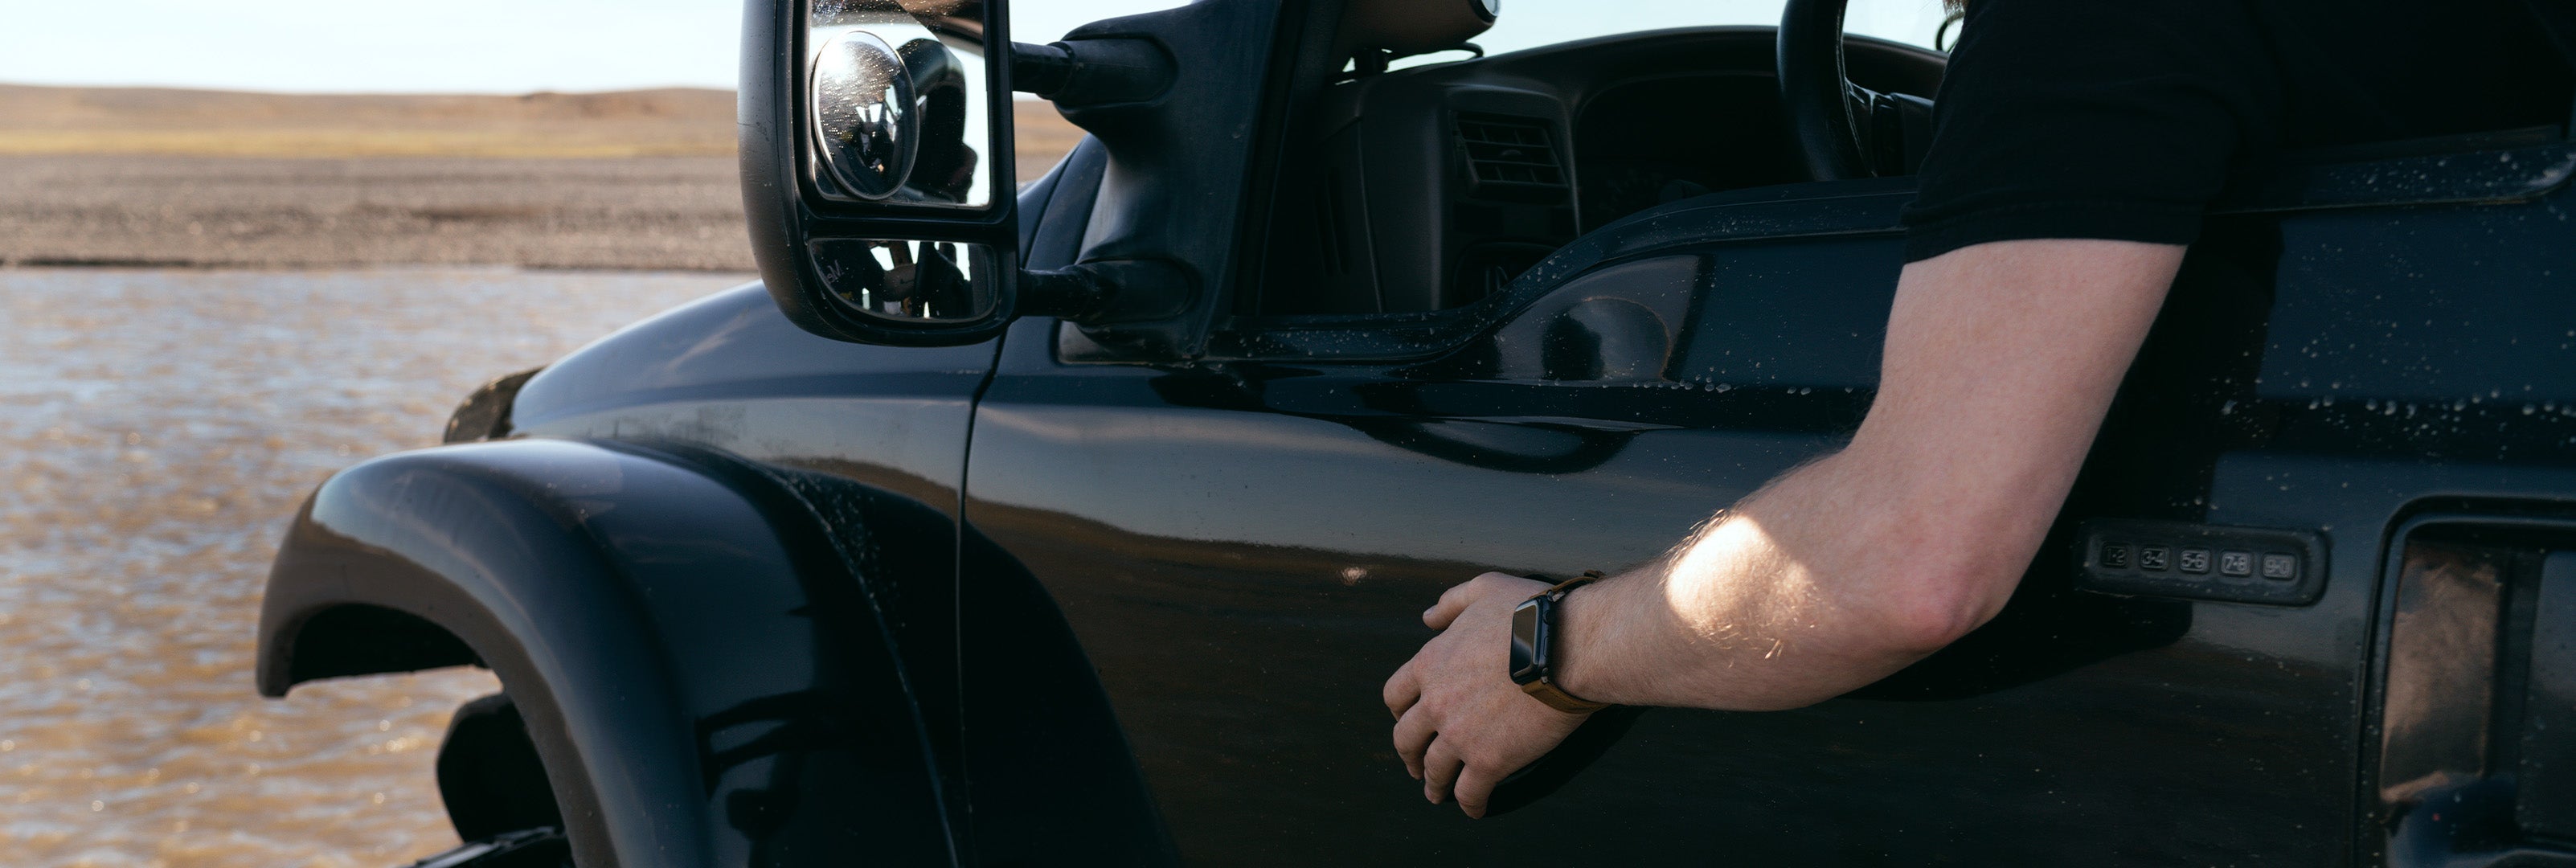 image of the side of a black vehicle, a man's arm hanging out of the window wearing a Groove Life watch band